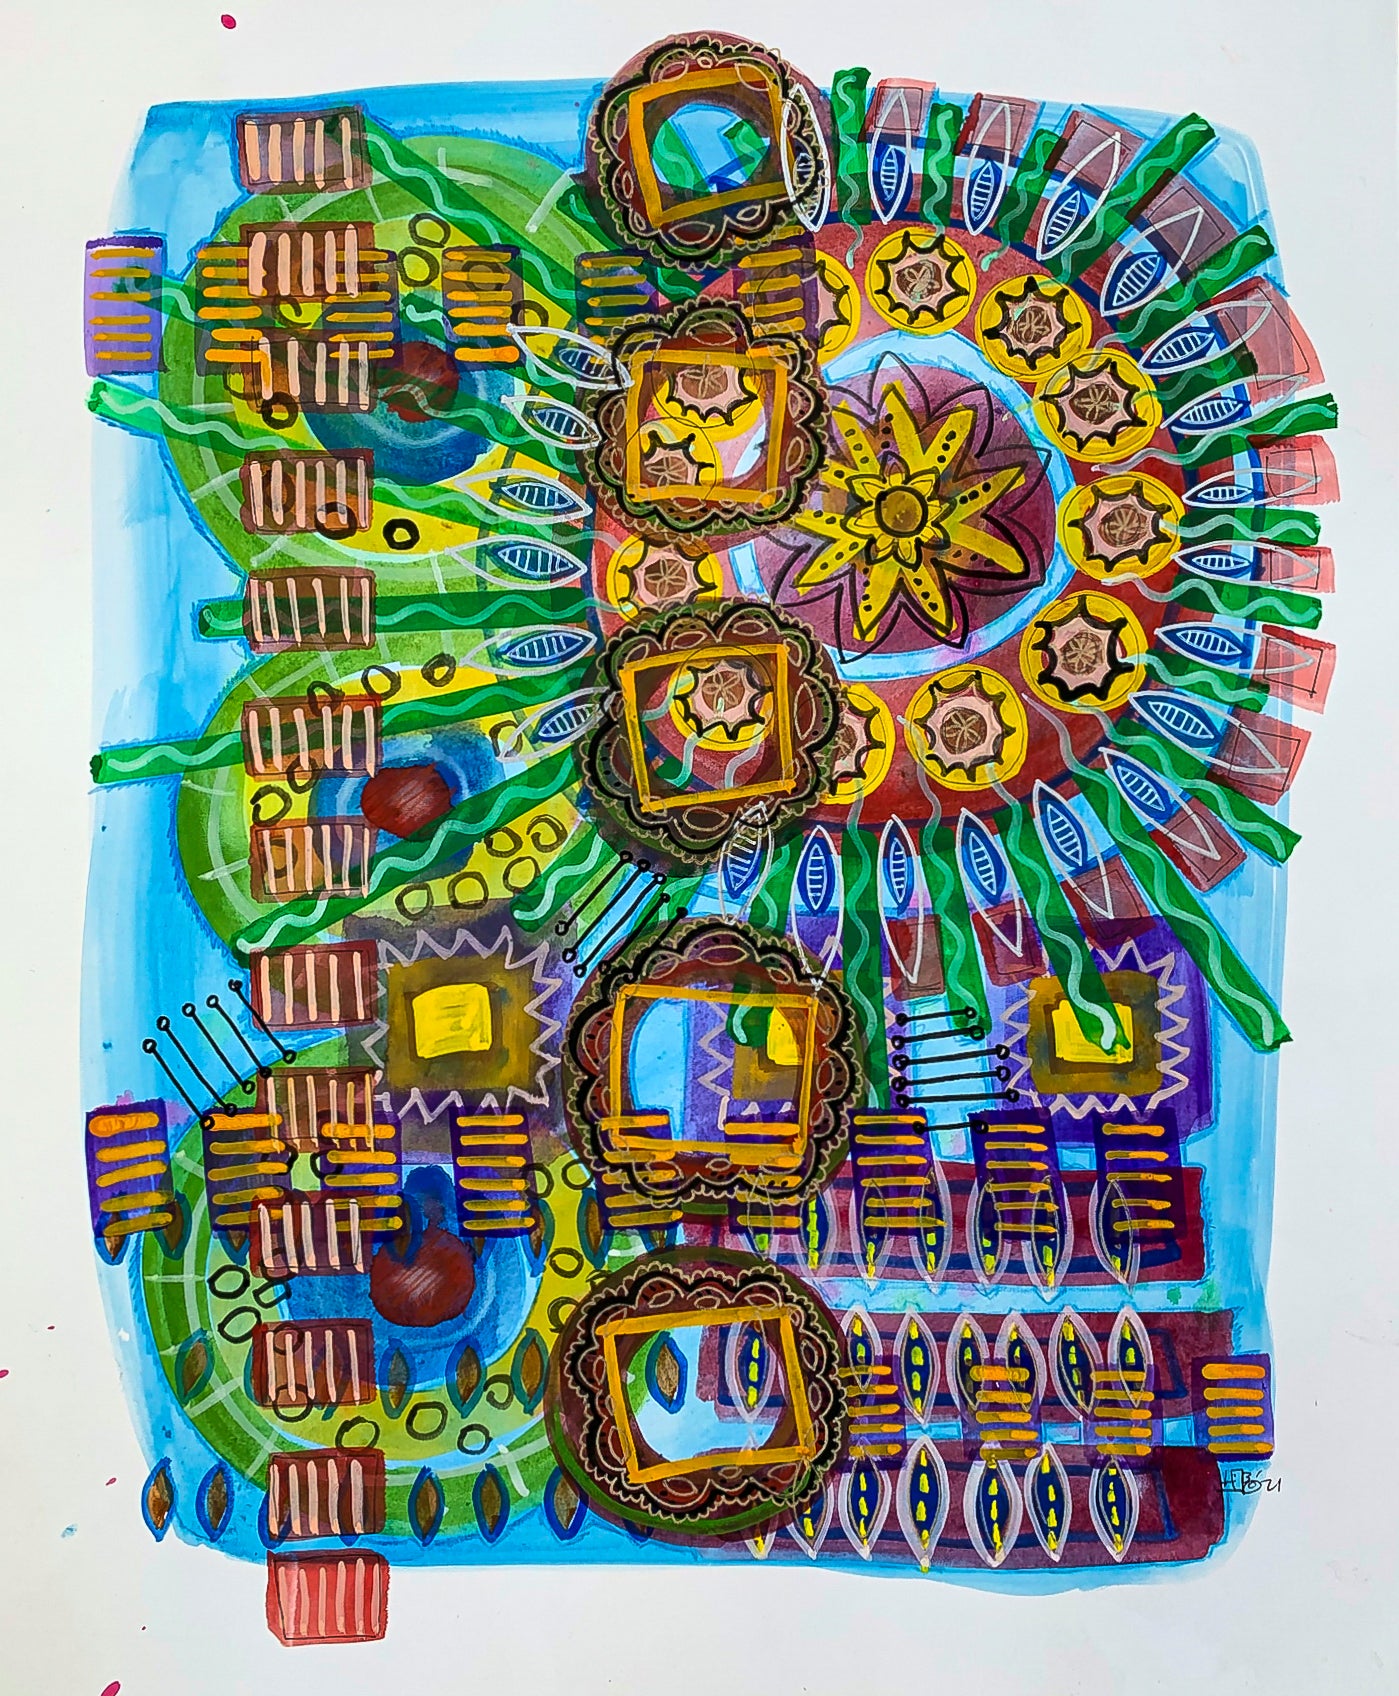 bstract mixed media colorful image by Jenifer Hernandez - use of paint, markers, added bits of paper title 'Sunny Day'